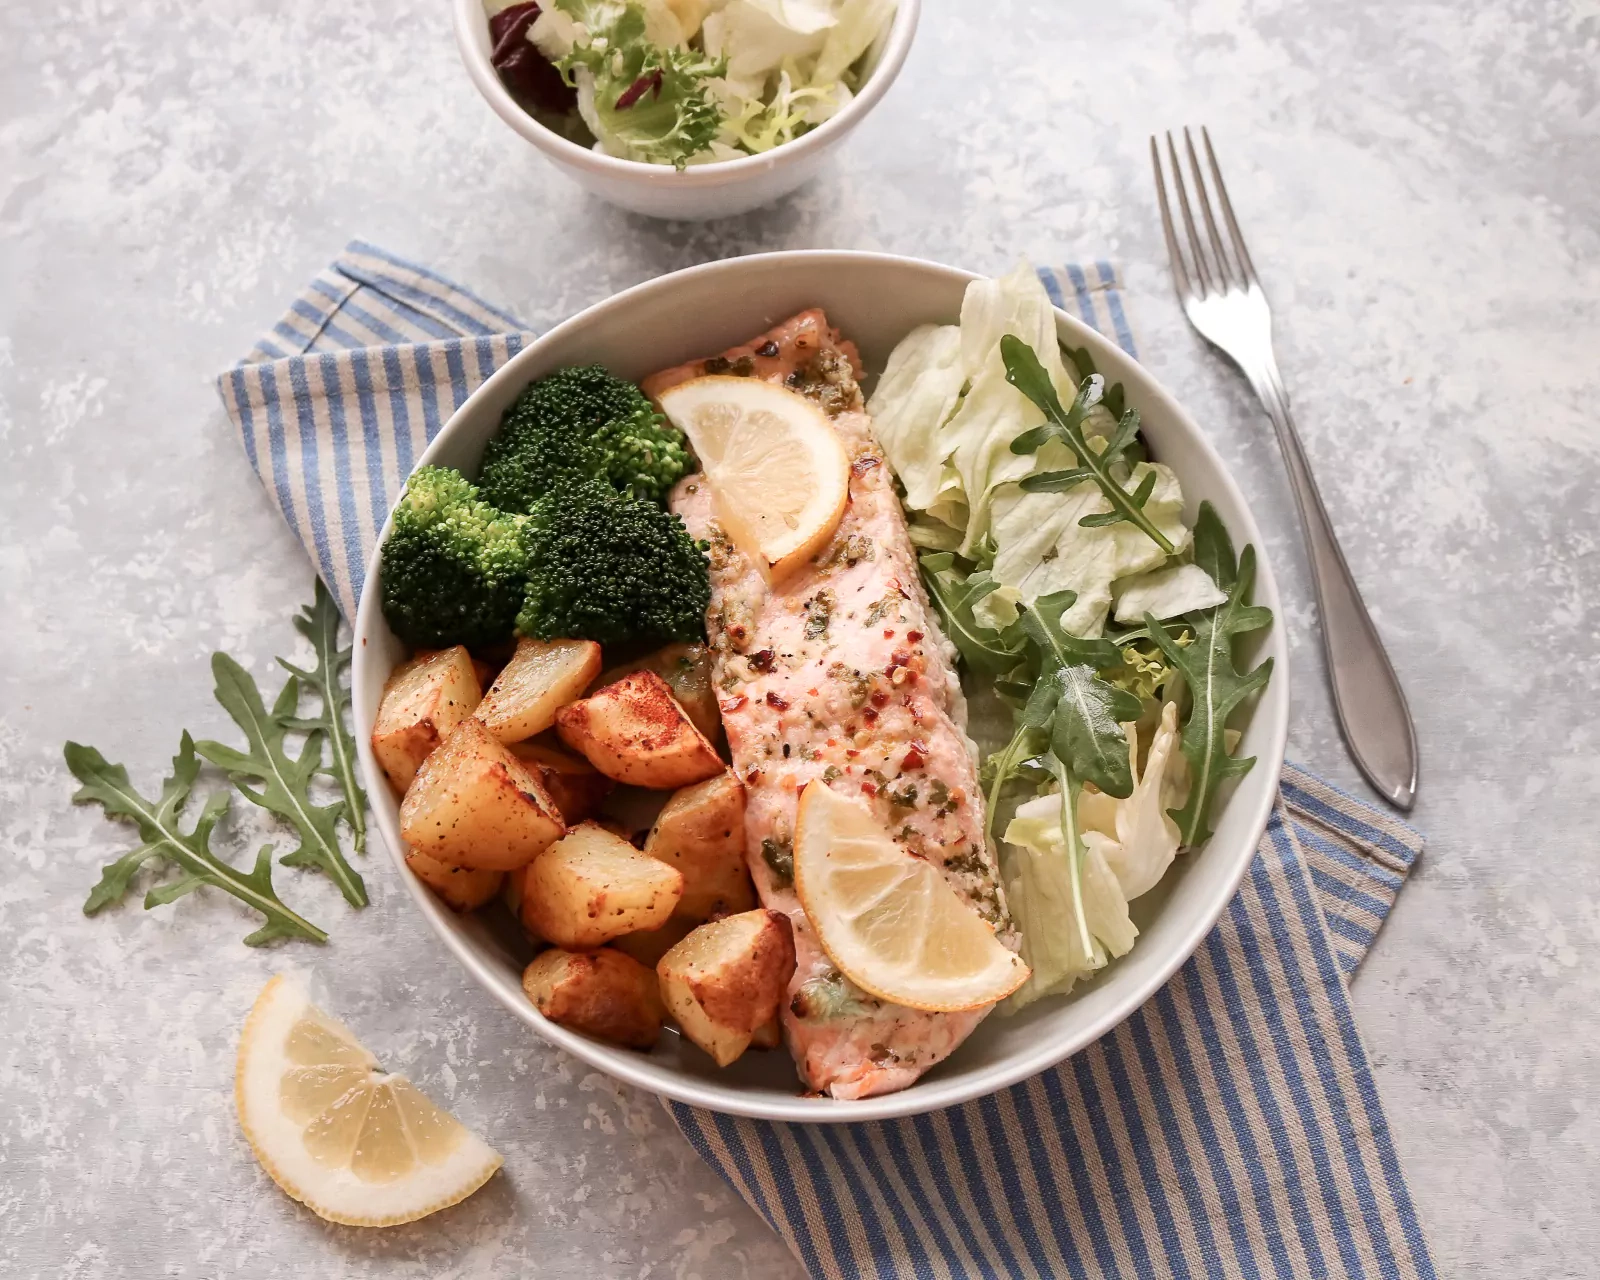 Delicious oven-roasted garlic-lemon salmon with potatoes and vegetables